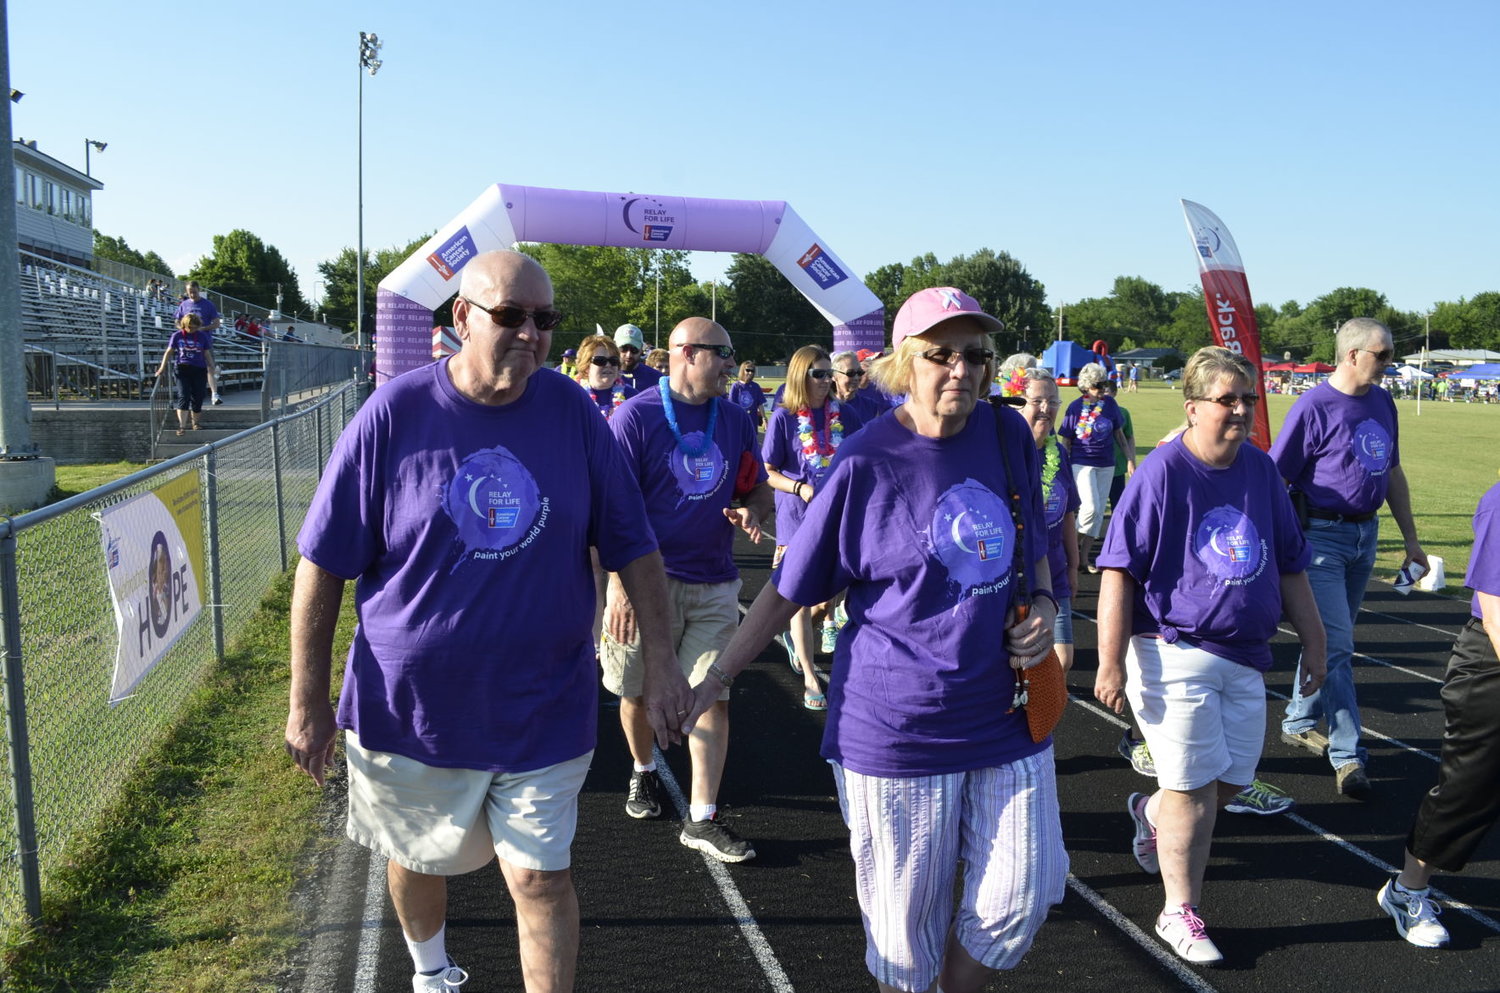 Schedule of events for Relay For Life, June 17 | Christian County